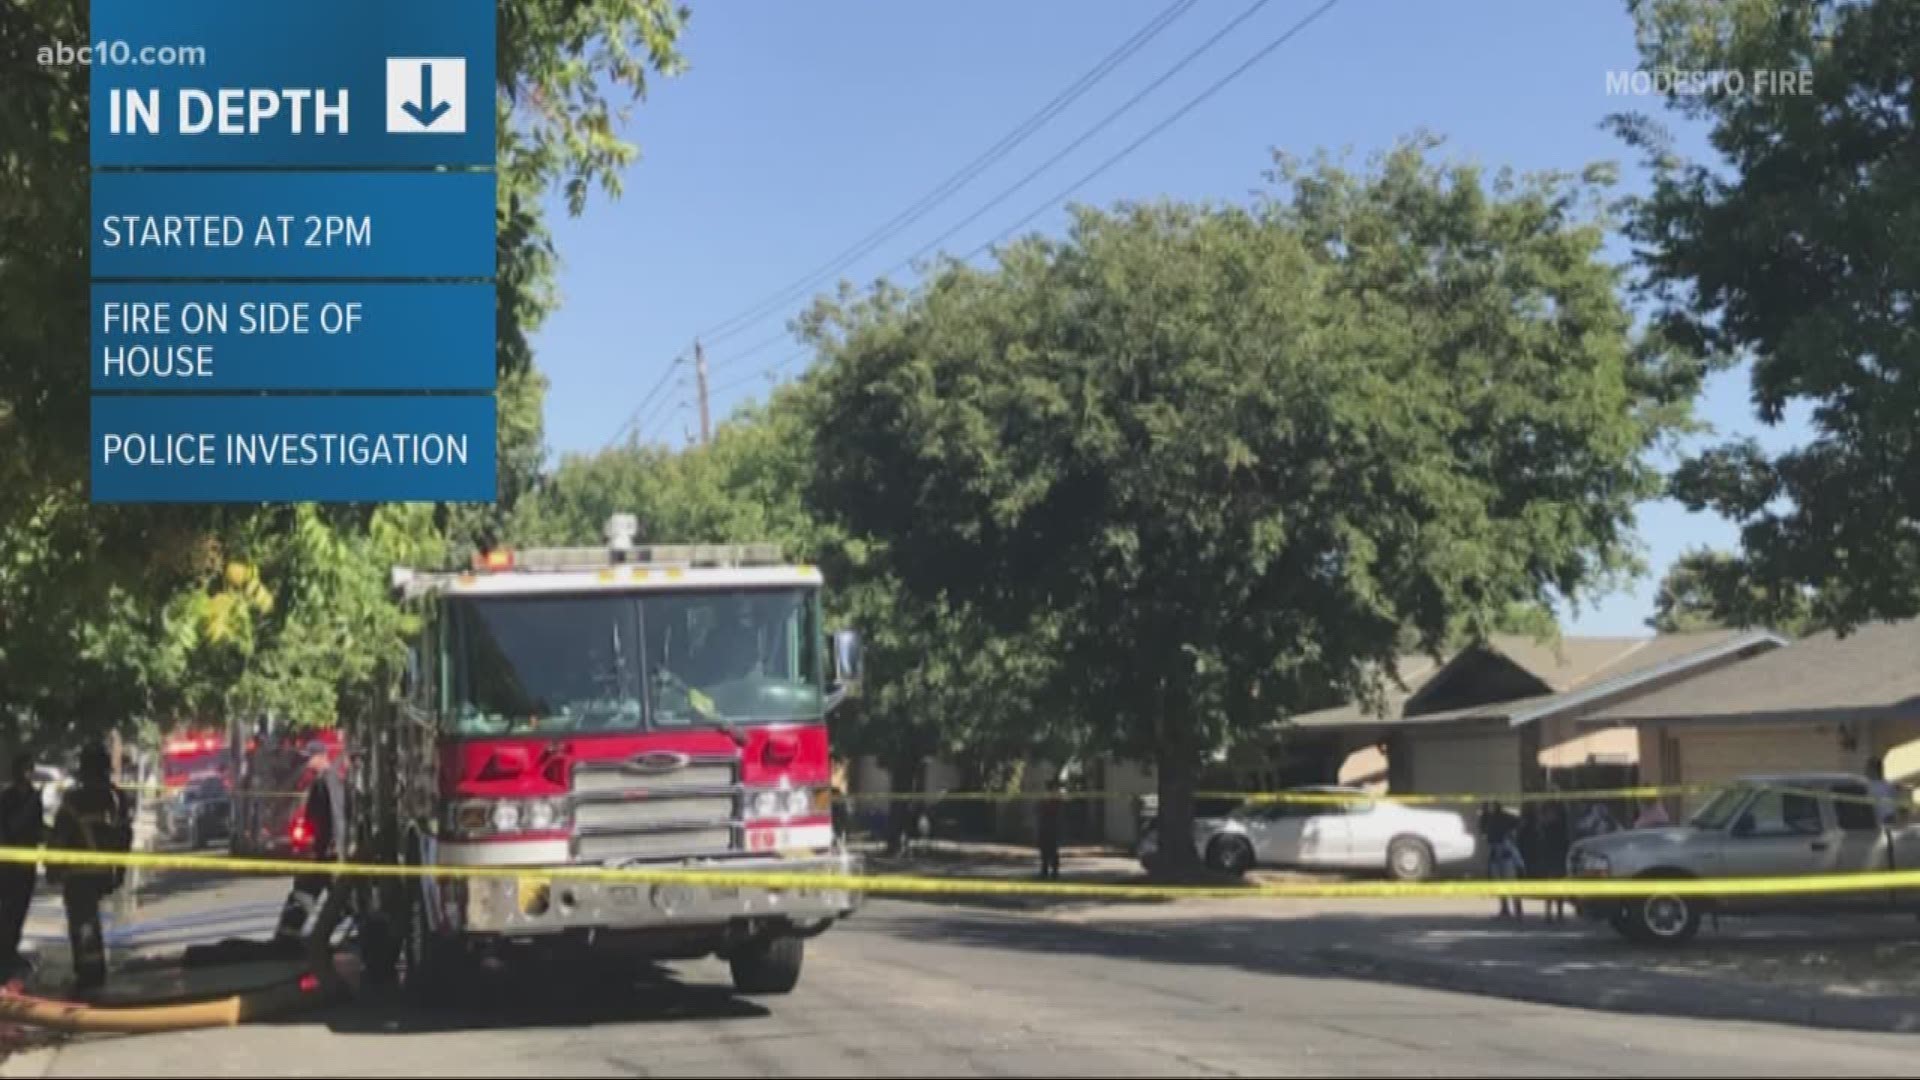 Modesto fire officials say crews were dispatched to the home, located in the 1600 block of Floyd Avenue, around 2 p.m. One victim was found inside the home and confirmed dead at the scene. 